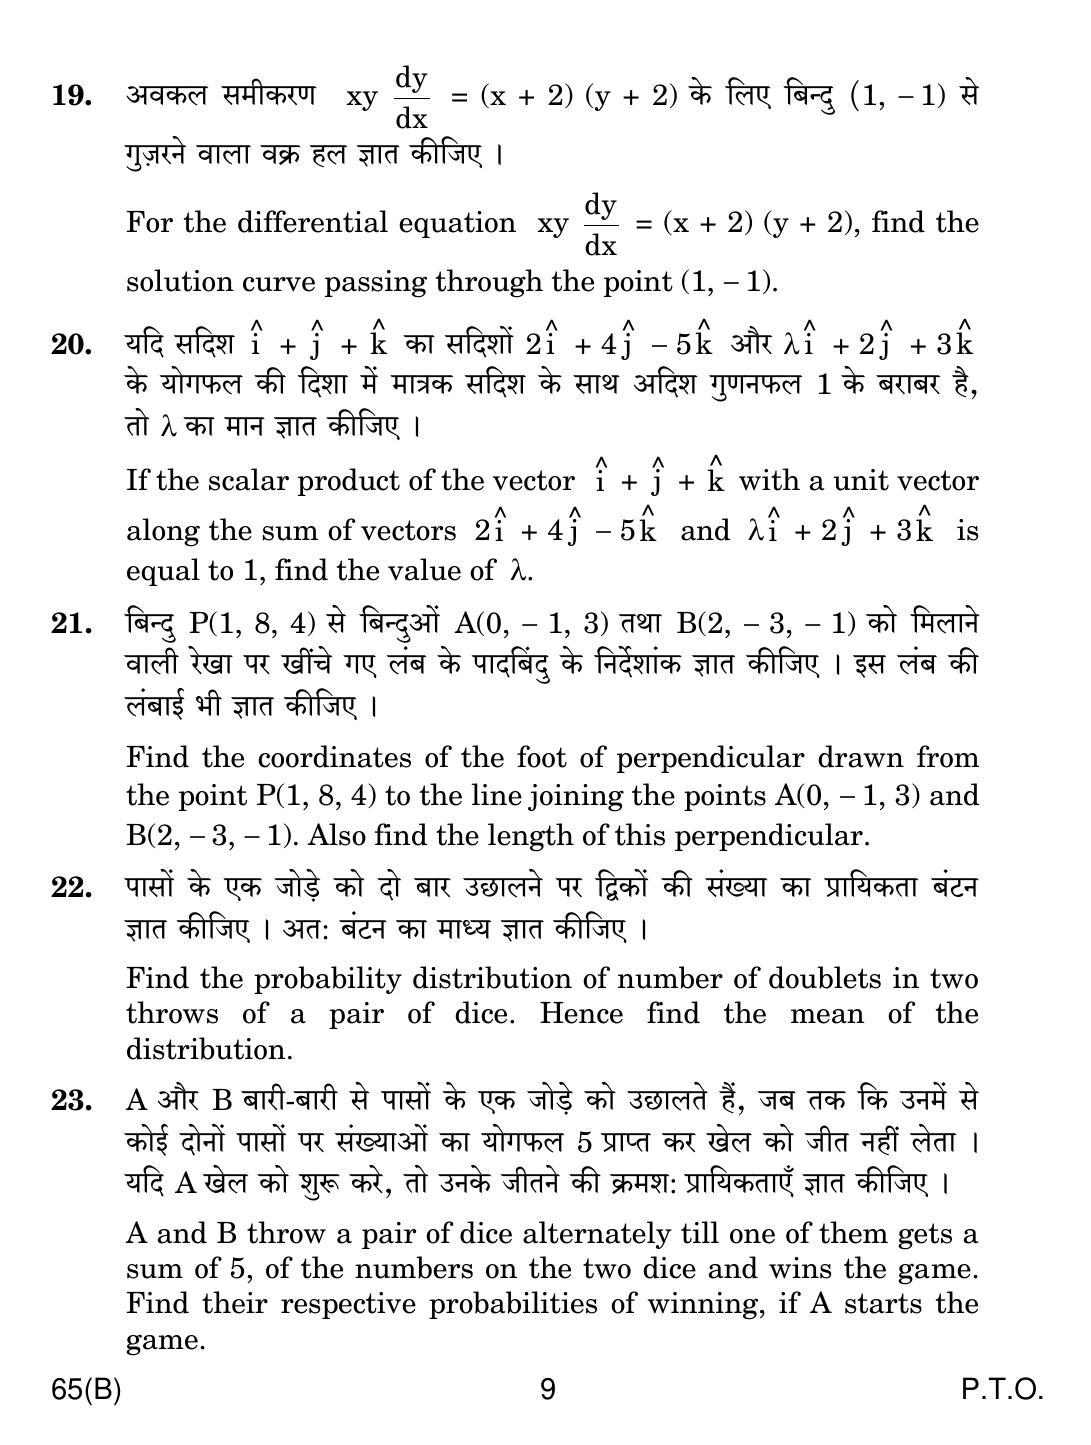 CBSE Class 12 65(B) MATHS FOR BLIND CANDIDATES 2018 Question Paper - Page 9